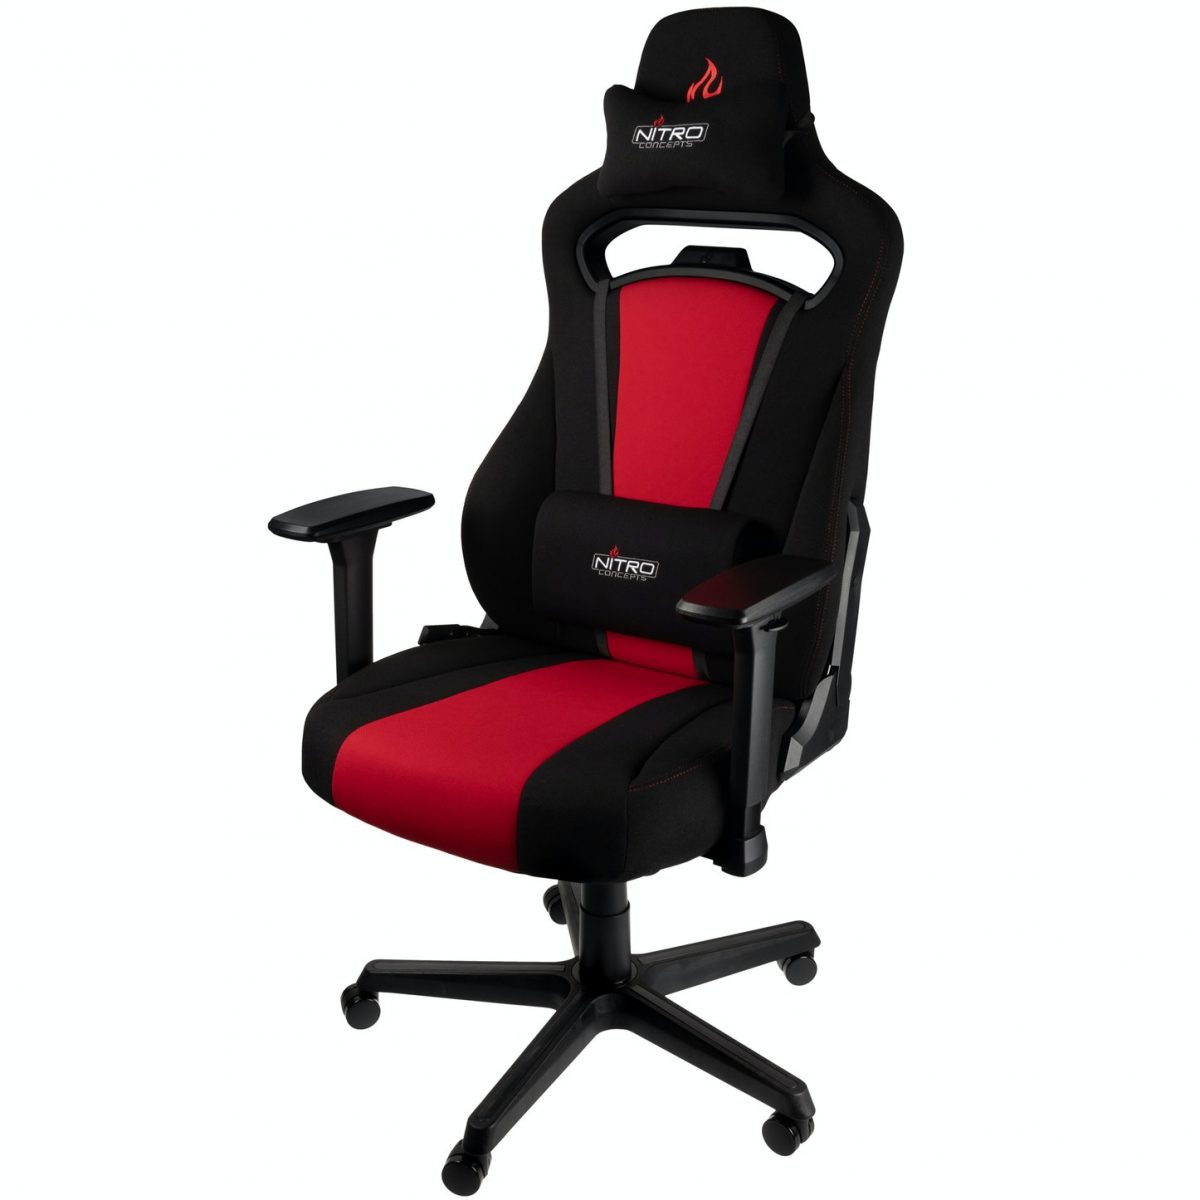 Nitro Concepts E250 Gaming Chair - Quality Fabric & Cold Foam - Black Red - CASEKING 2.35.63.02.020